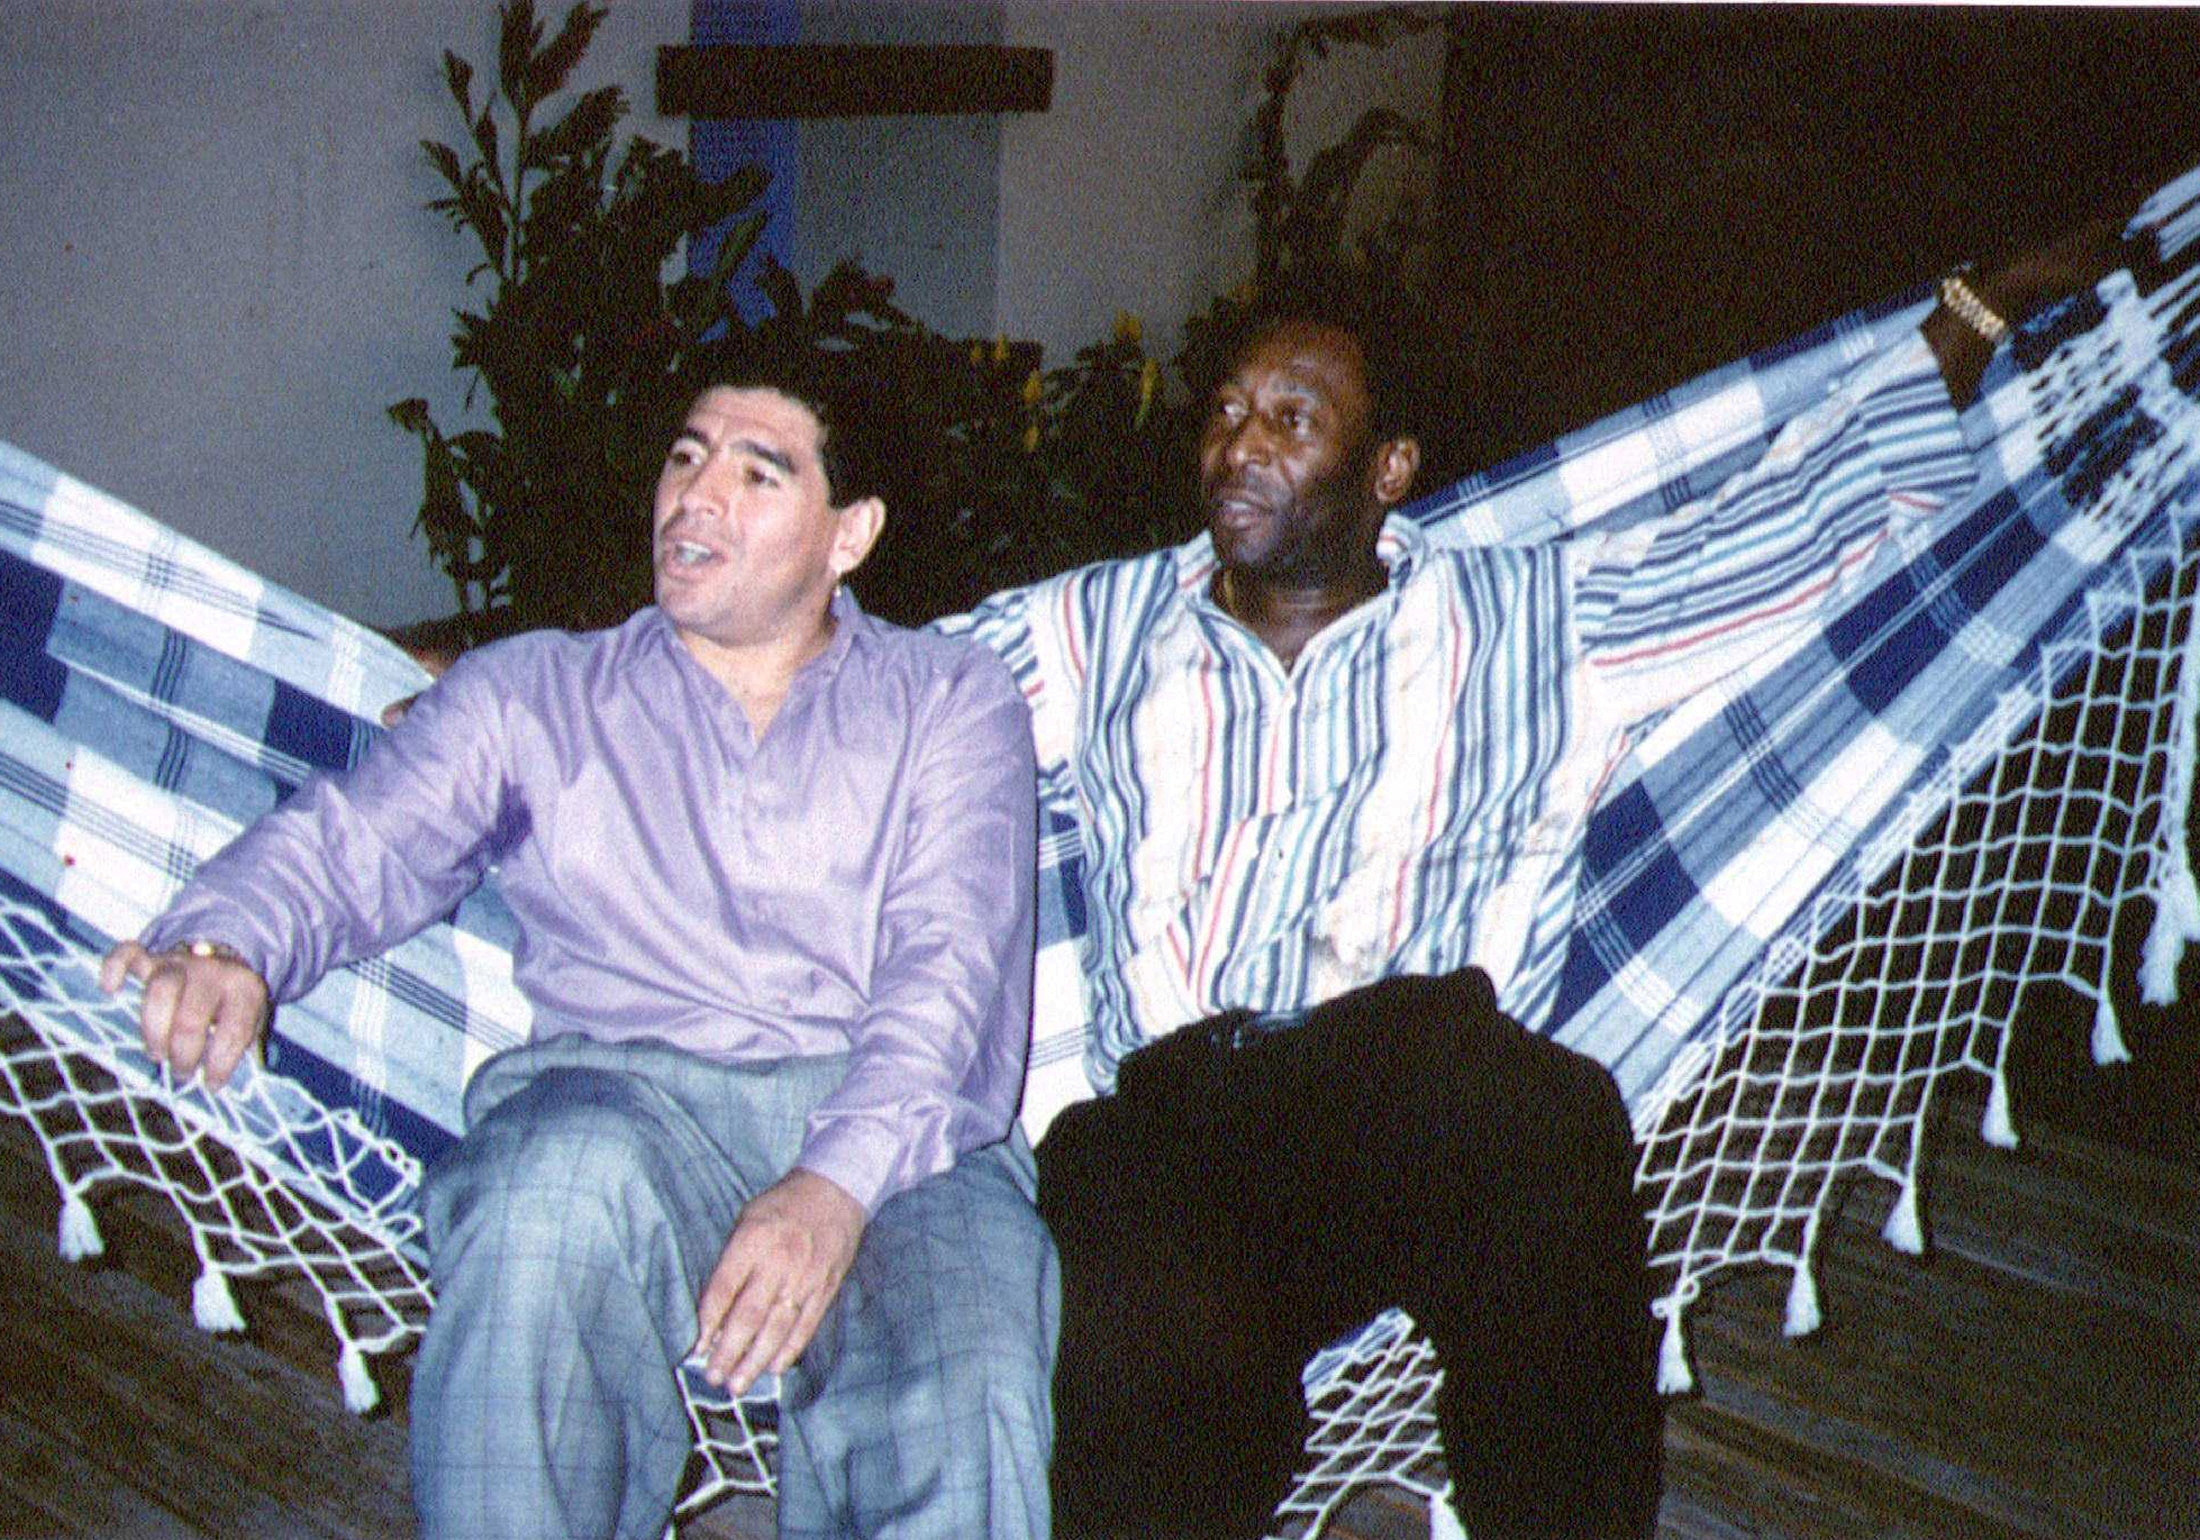 Pele or Maradona? Debate Will Continue Raging Over Who Was Greater